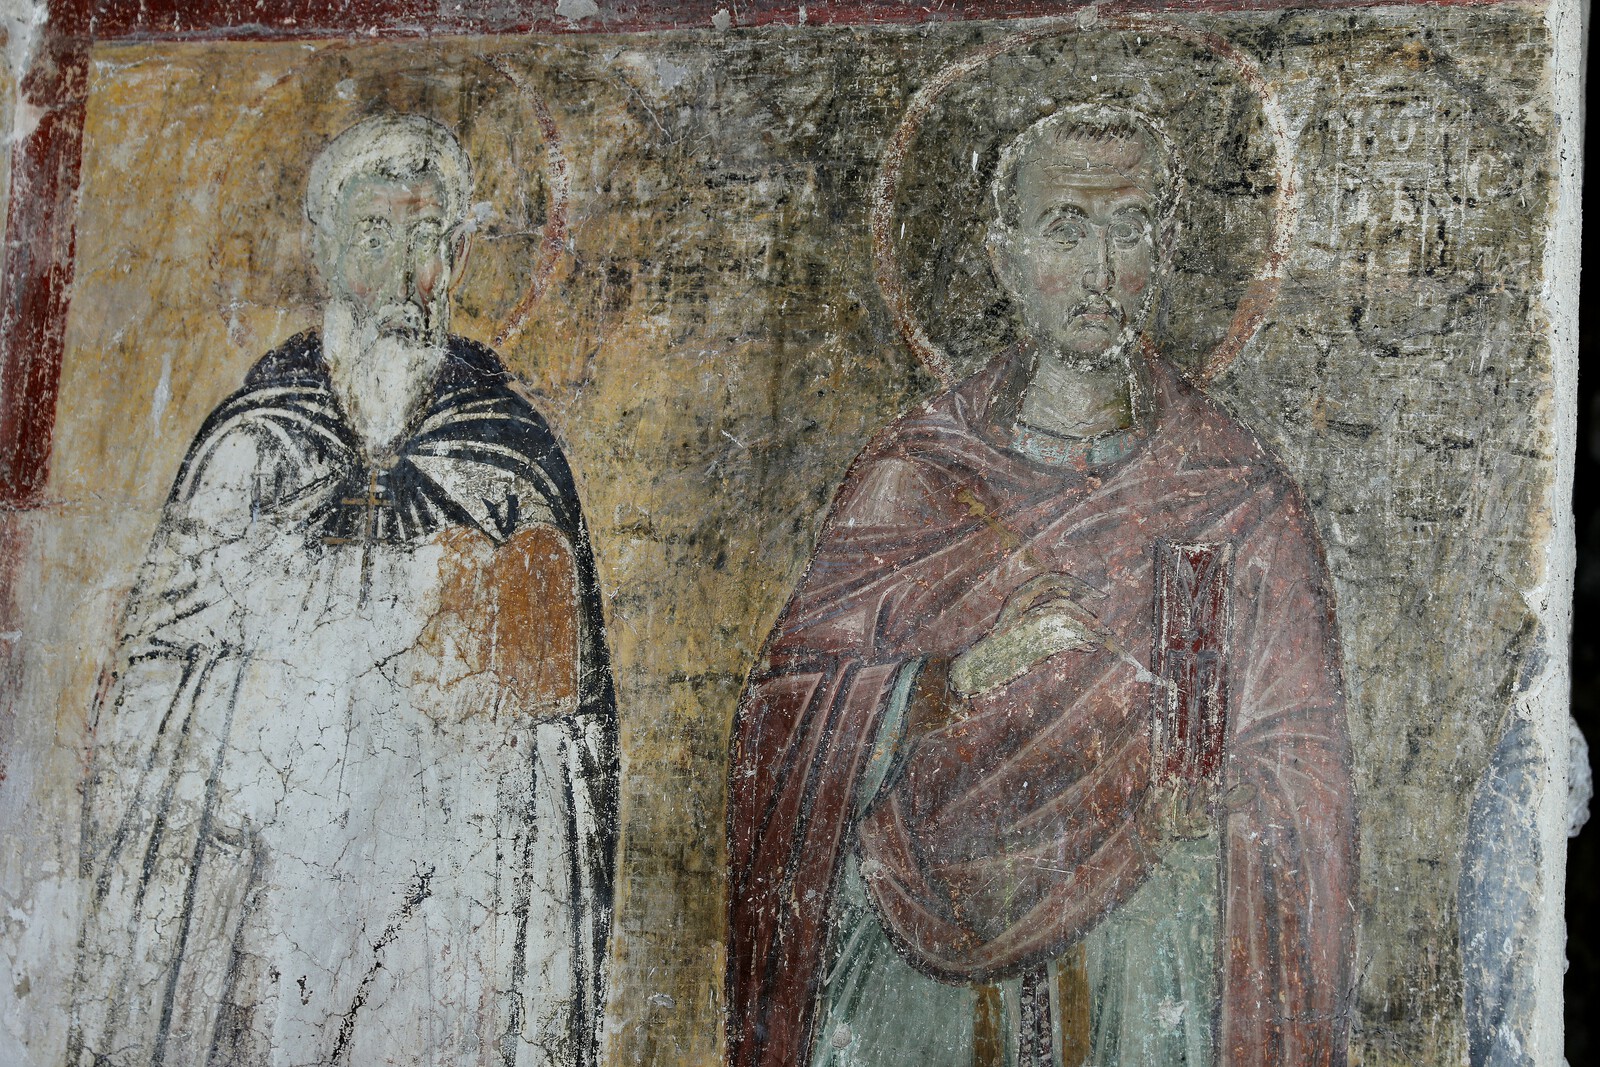 Sts. Stephen the Younger and Cosmas, detail